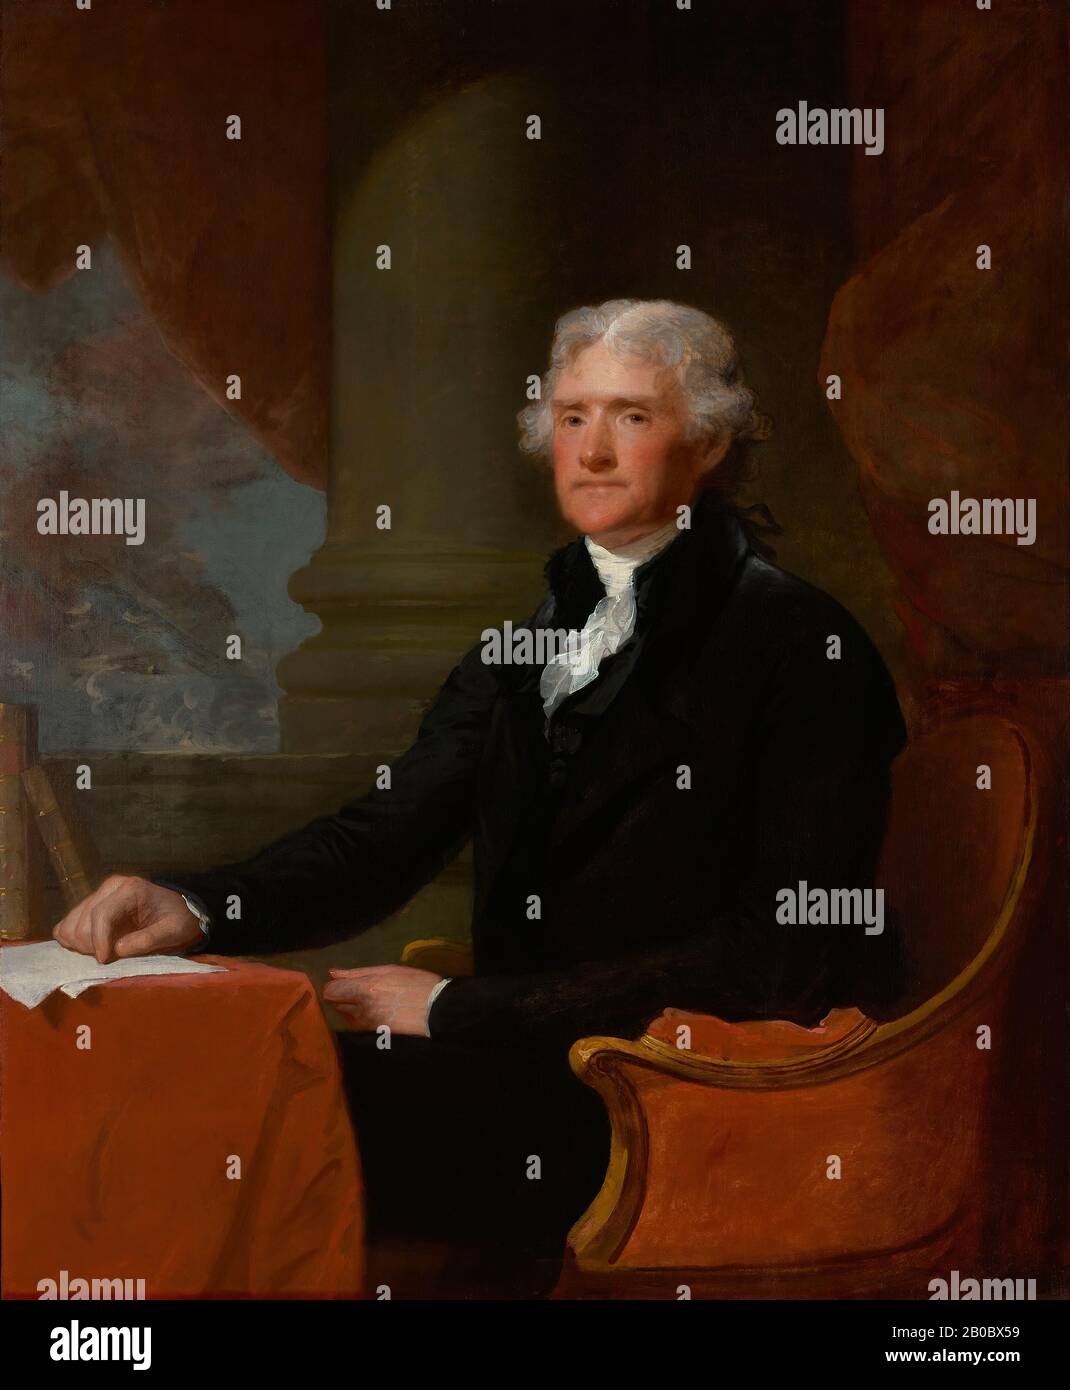 Gilbert Stuart, Portrait of Thomas Jefferson, ca. 1805-1807, oil on canvas, 48 1/2 in. x 39 7/8 in. (123.19 cm x 101.28 cm), James Bowdoin III greatly admired Thomas Jefferson's republican principles and felt a kinship with his interest in art and culture. After Jefferson appointed him Minister Plenipotentiary to the Court of Spain, Bowdoin offered his services to acquire paintings and sculpture for the President while abroad. Indeed, shortly before his departure for Europe in 1805, Bowdoin presented to Jefferson a marble copy of an antique sculpture in the Vatican's collection that he believe Stock Photo